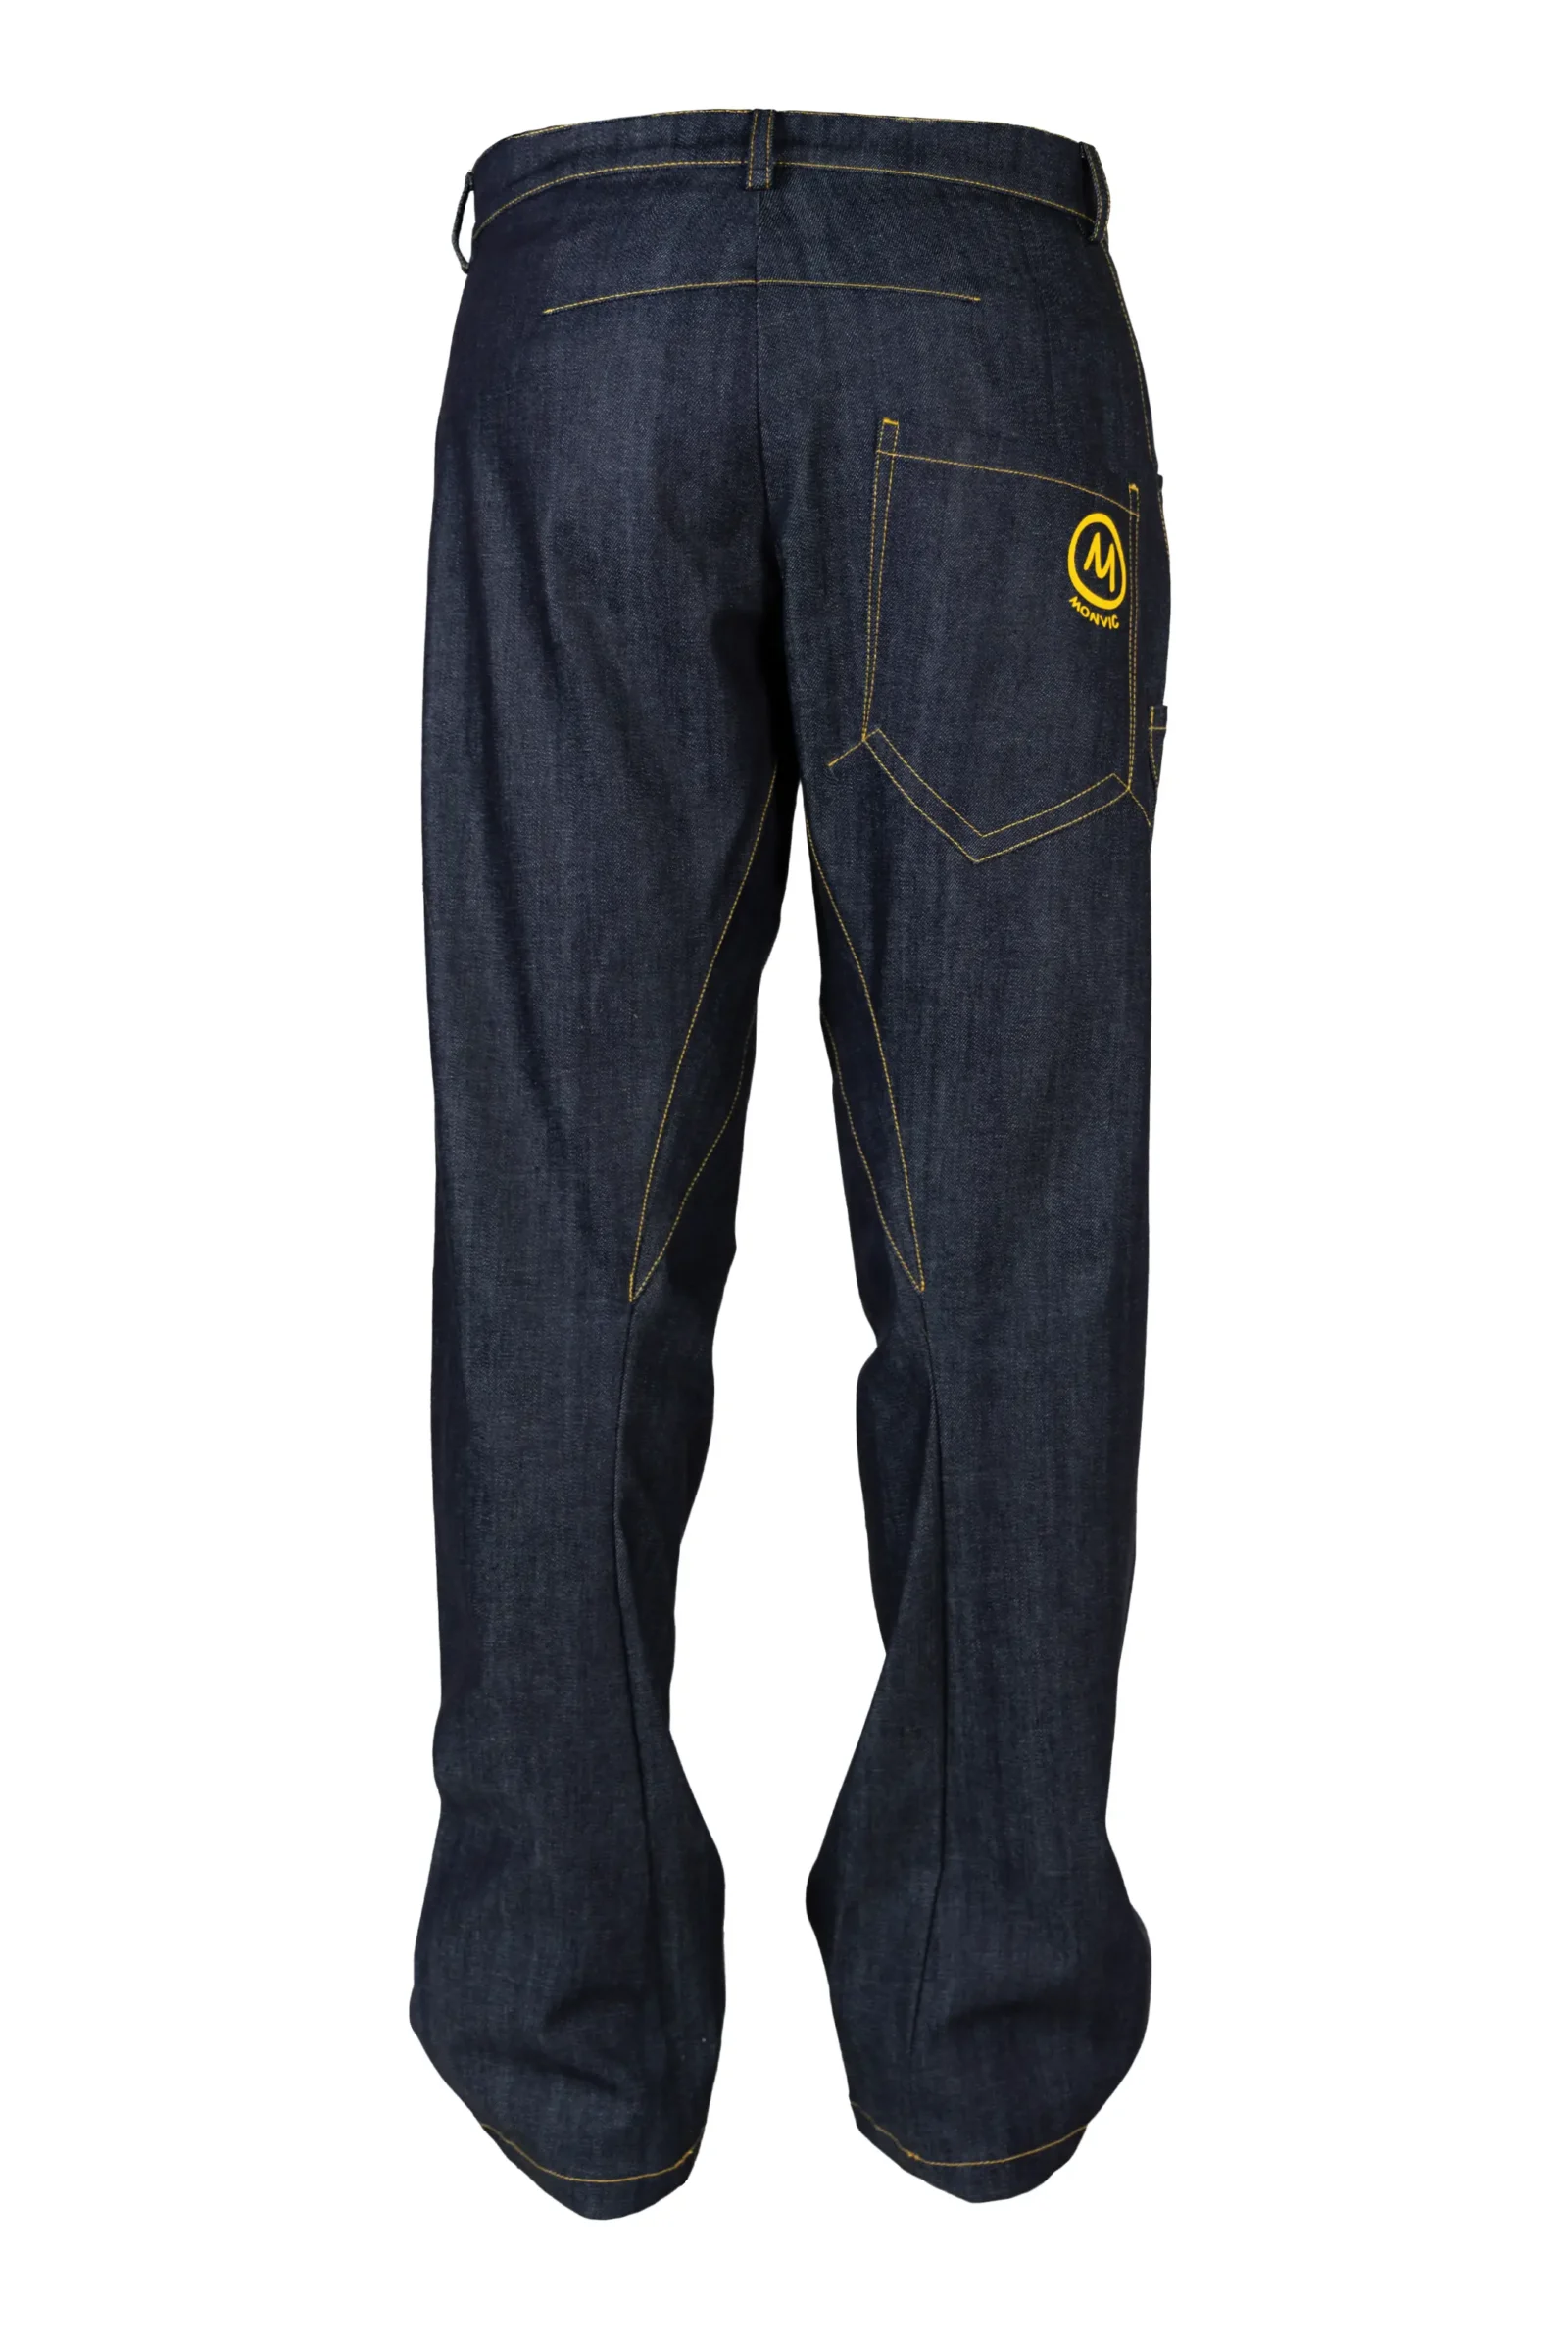 Men's loose fit denim jeans with yellow stitching - GEO Monvic